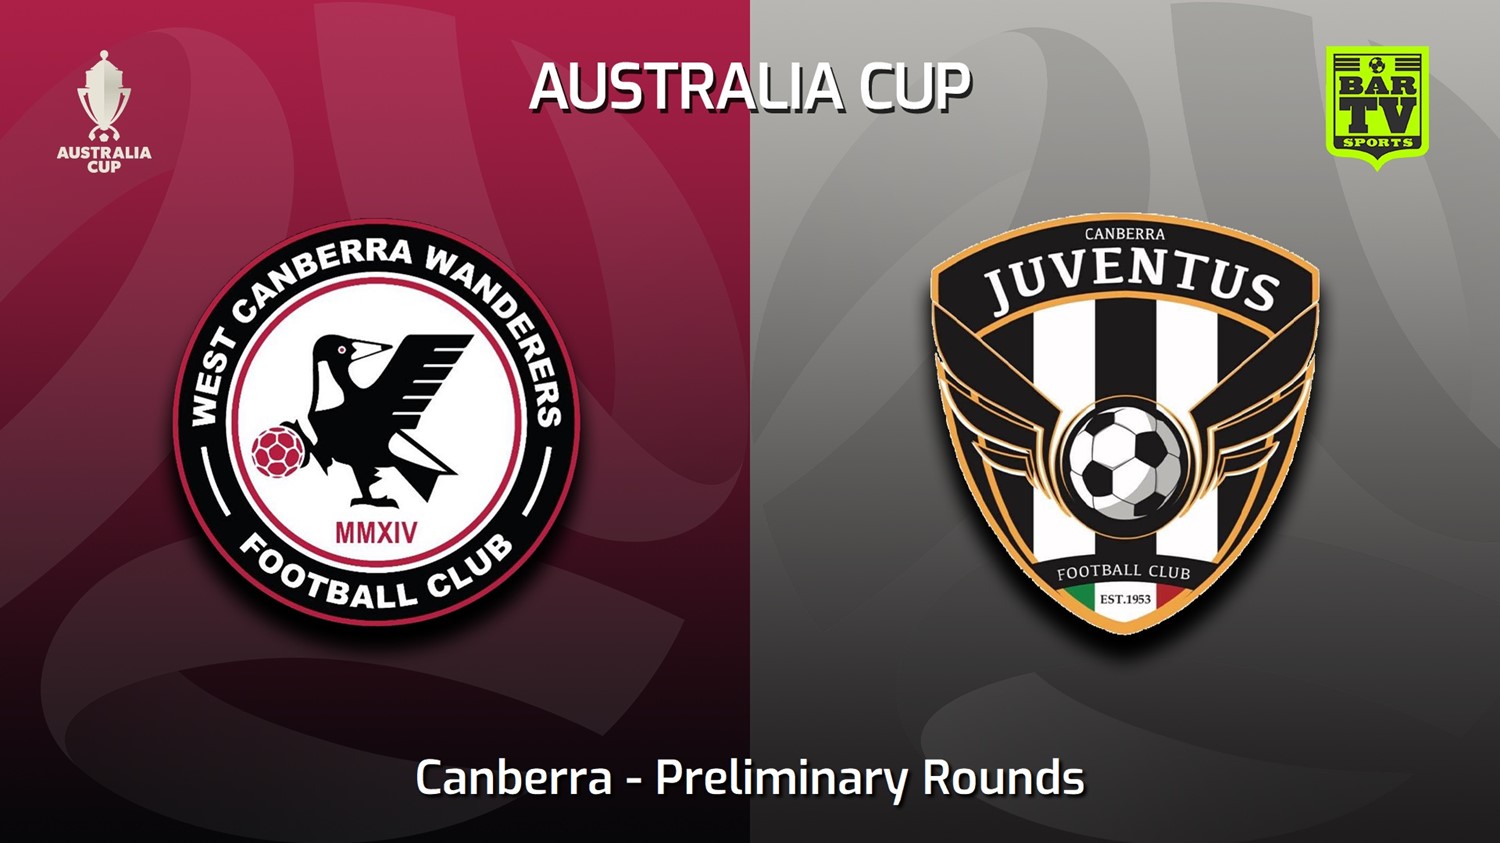 230319-Australia Cup Qualifying Canberra Preliminary Rounds - West Canberra Wanderers v Canberra Juventus Minigame Slate Image